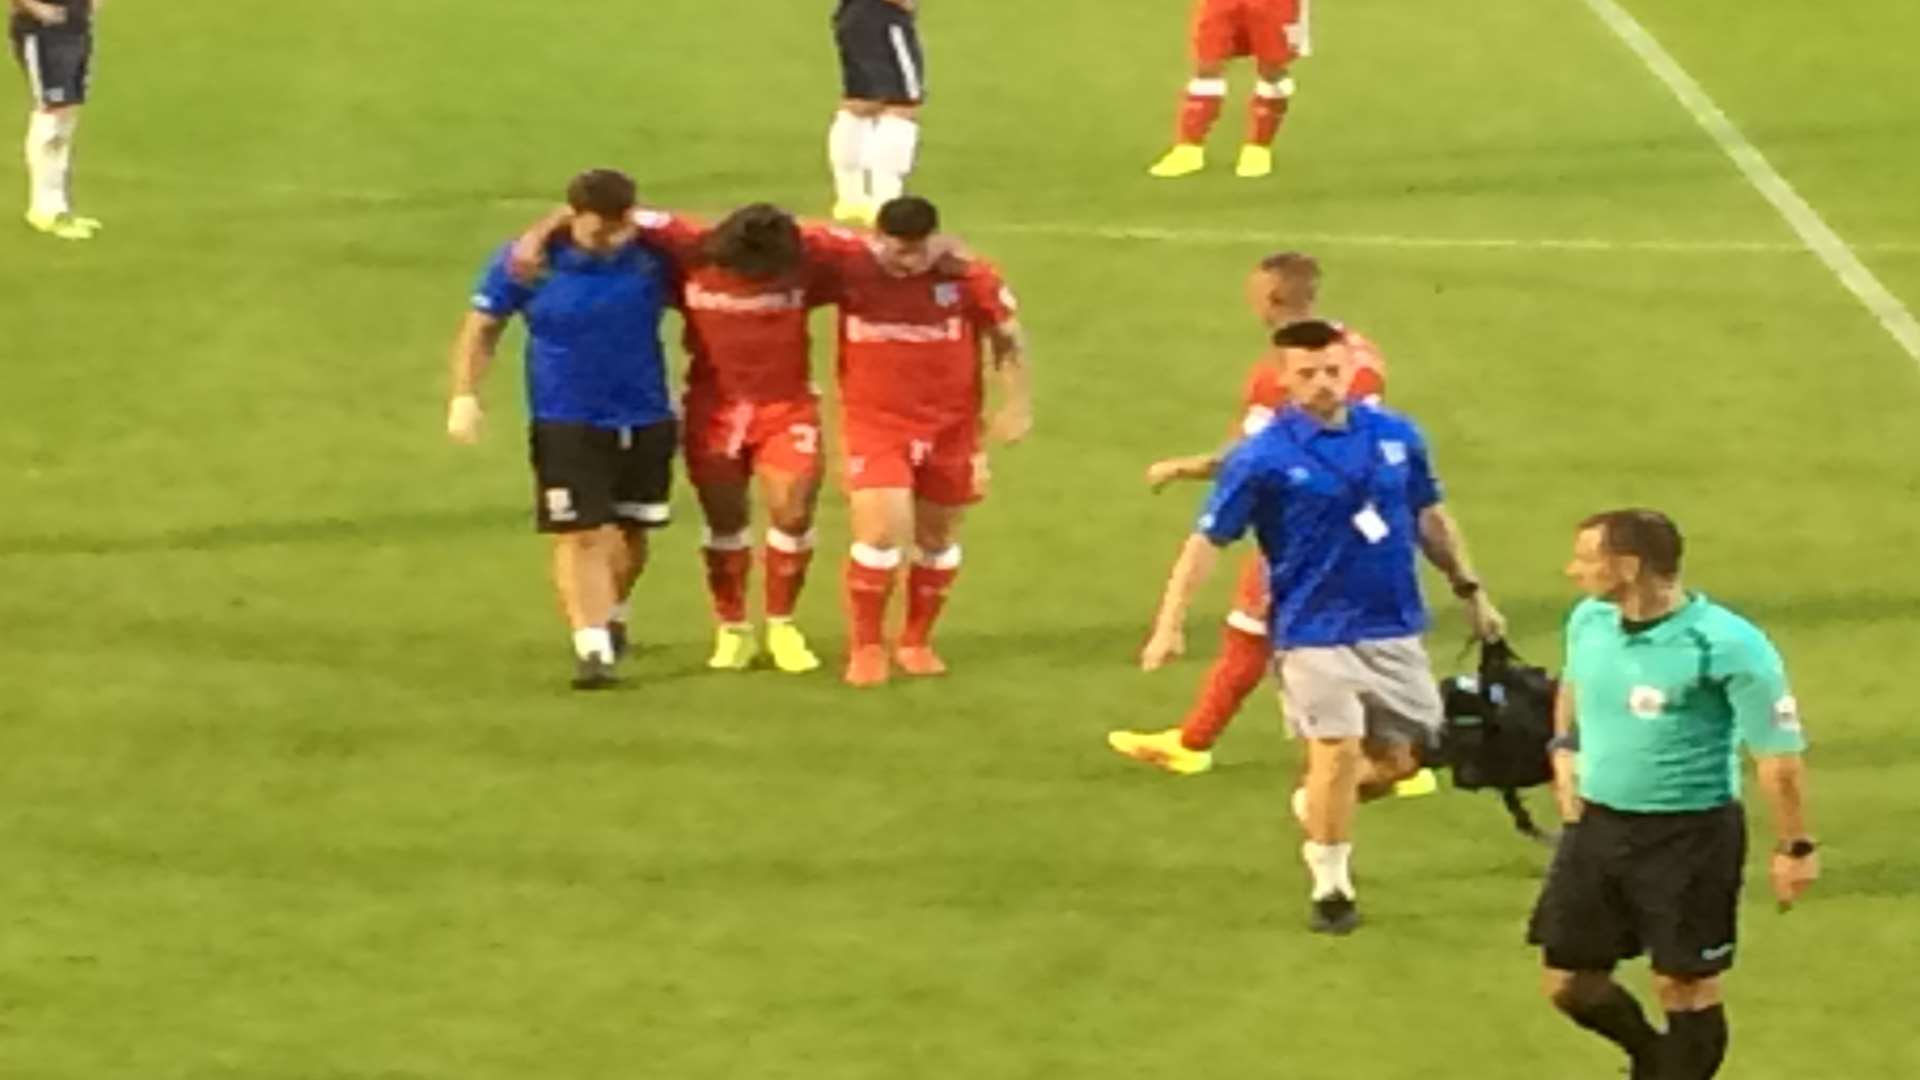 Bradley Dack limps off at Southend United on Tuesday night